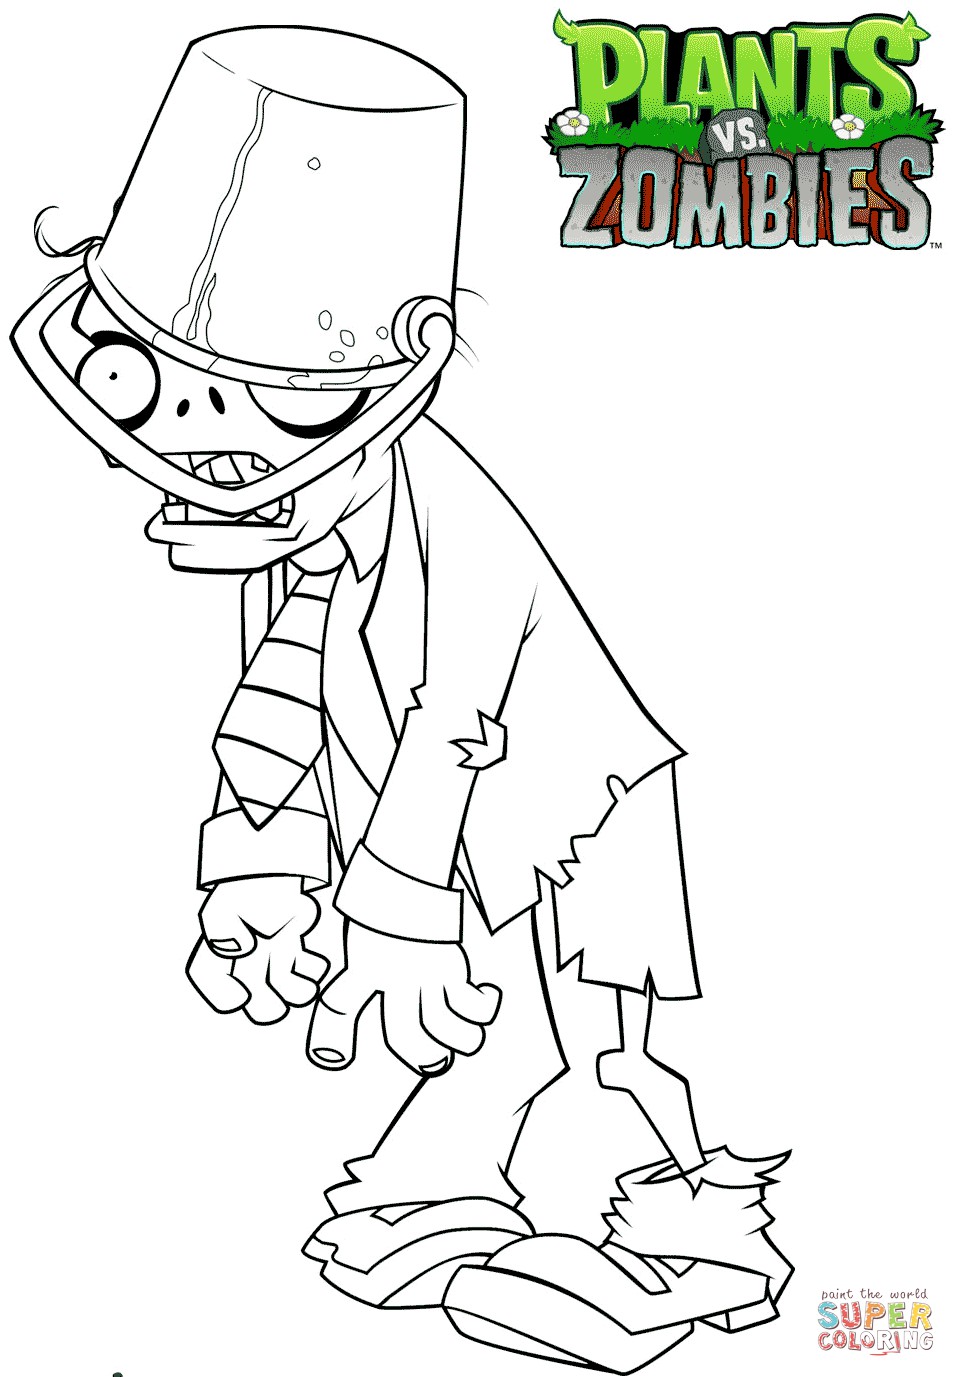 Zombies Buckethead Zombie coloring pages to view printable version or color it online patible with iPad and Android tablets